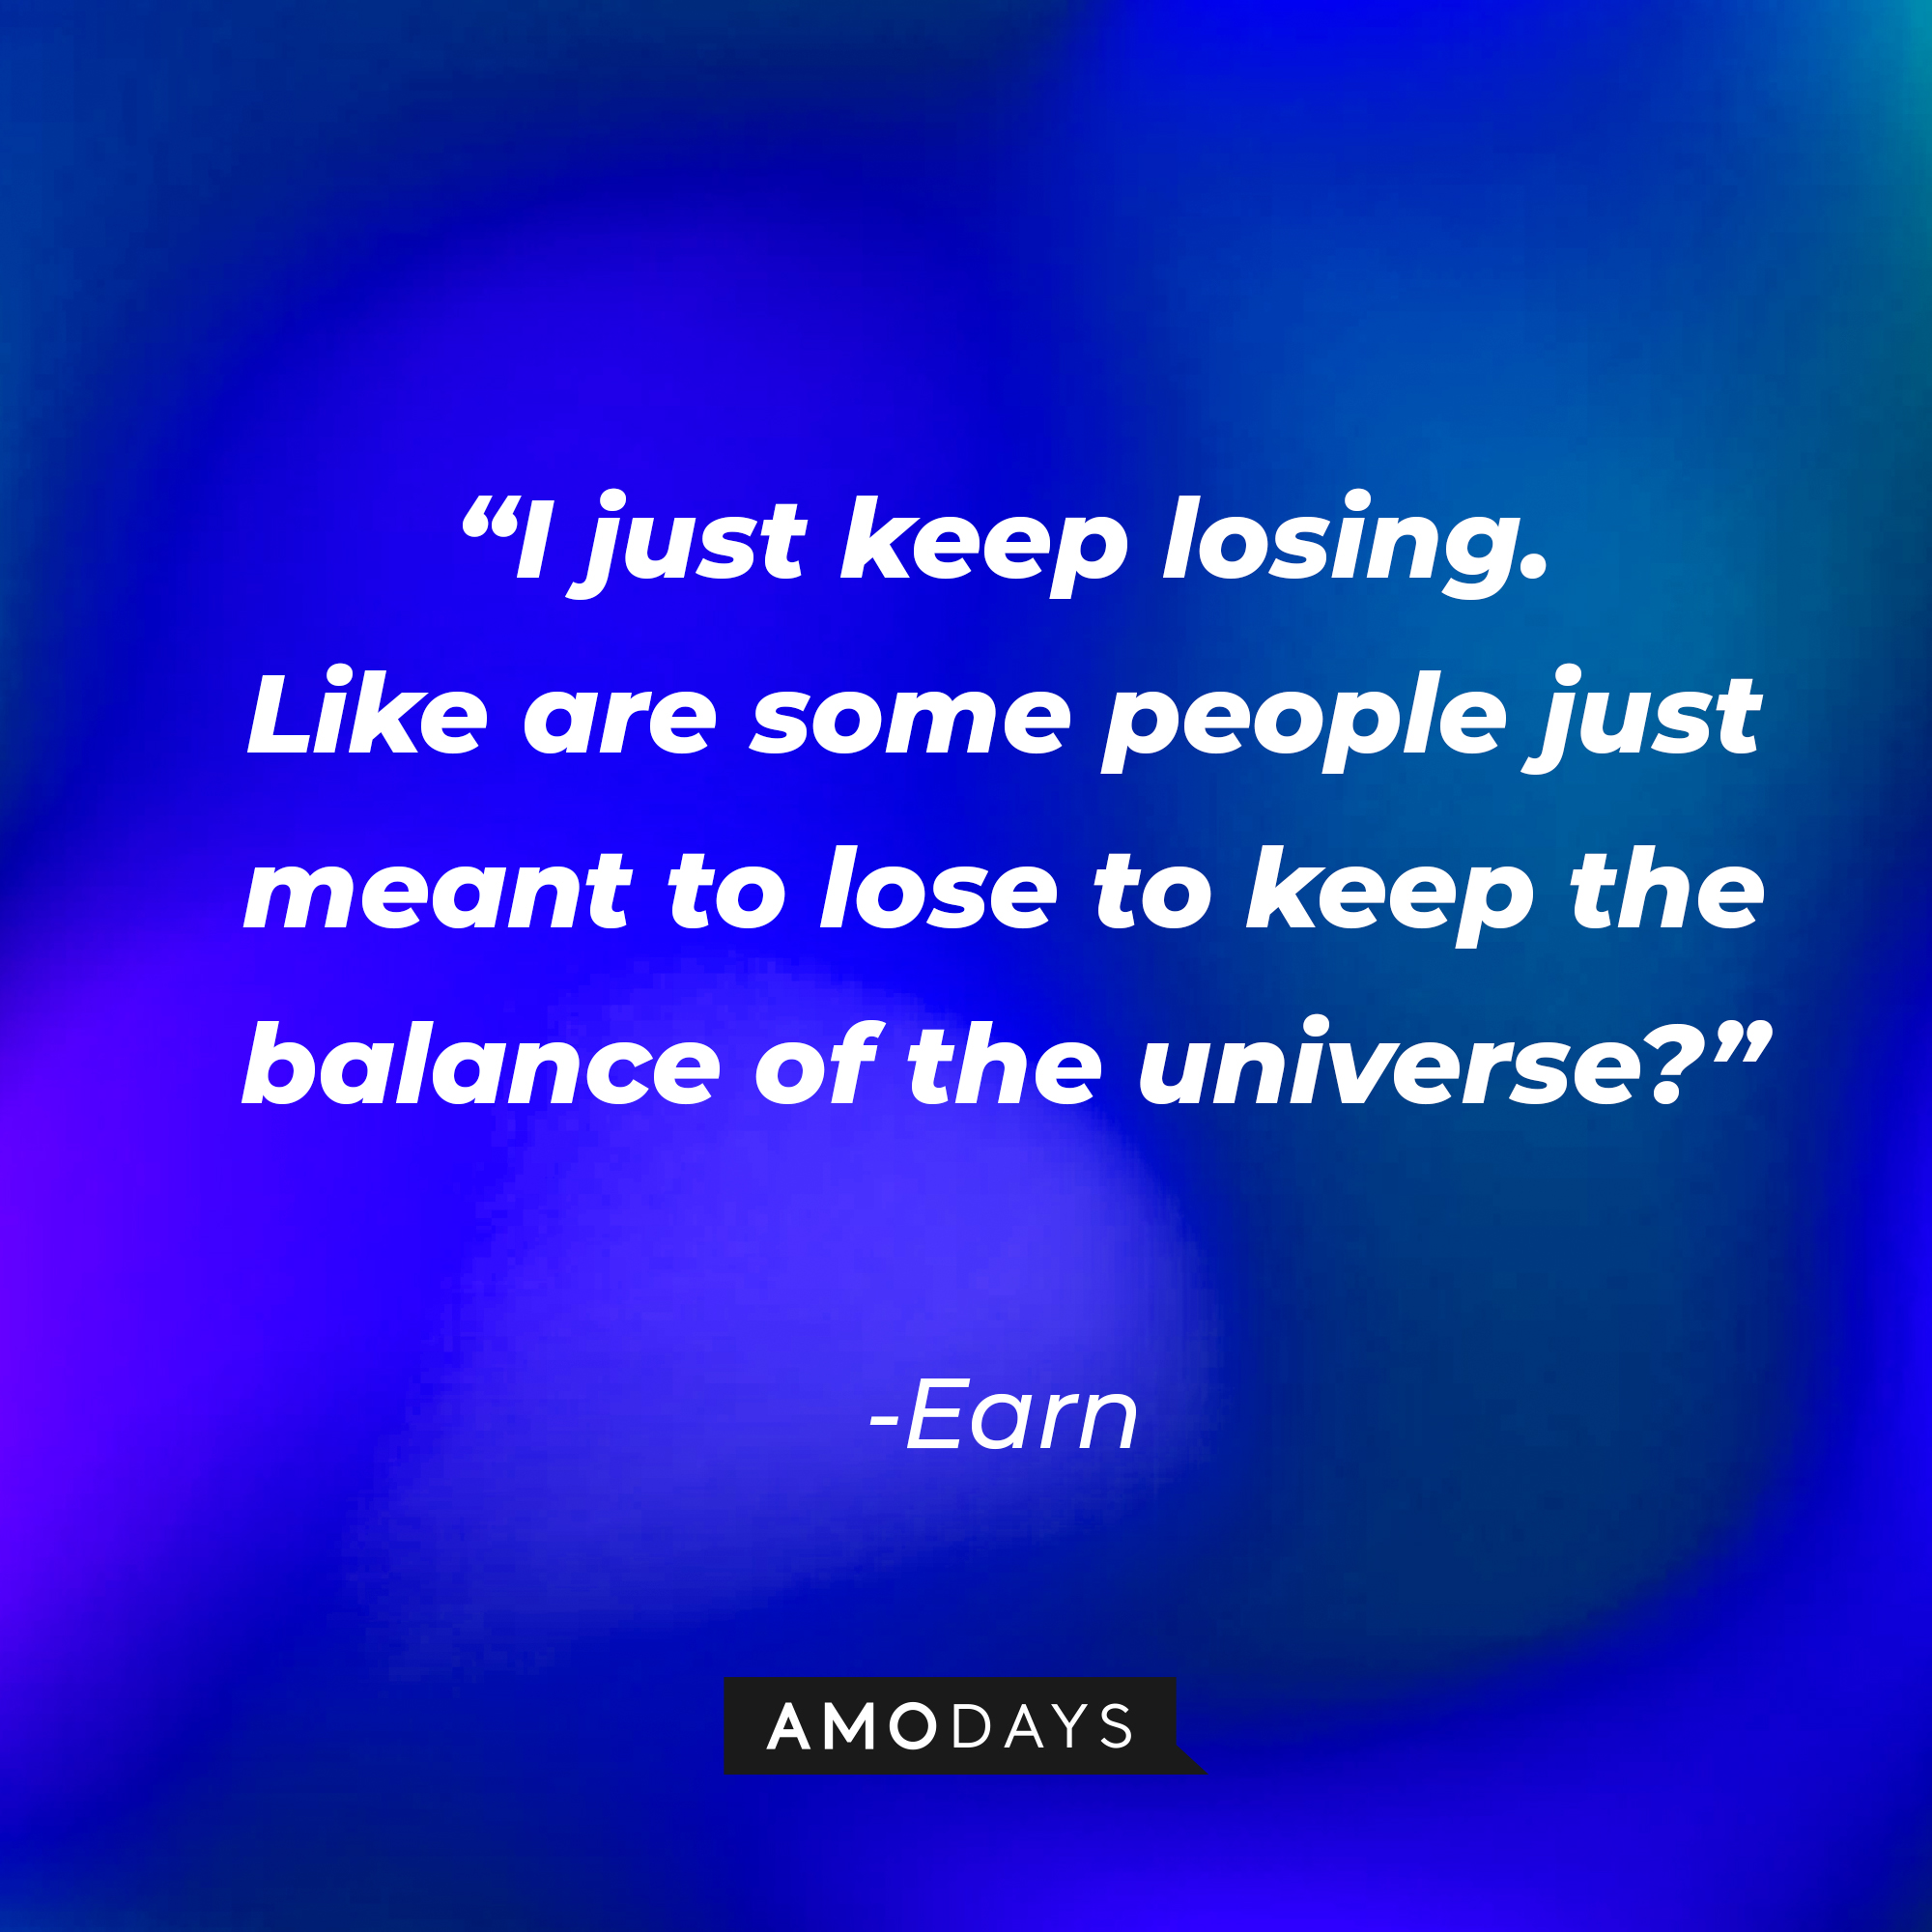 Earn’s quote: “I just keep losing. Like are some people just meant to lose to keep the balance of the universe?” | Source: AmoDays